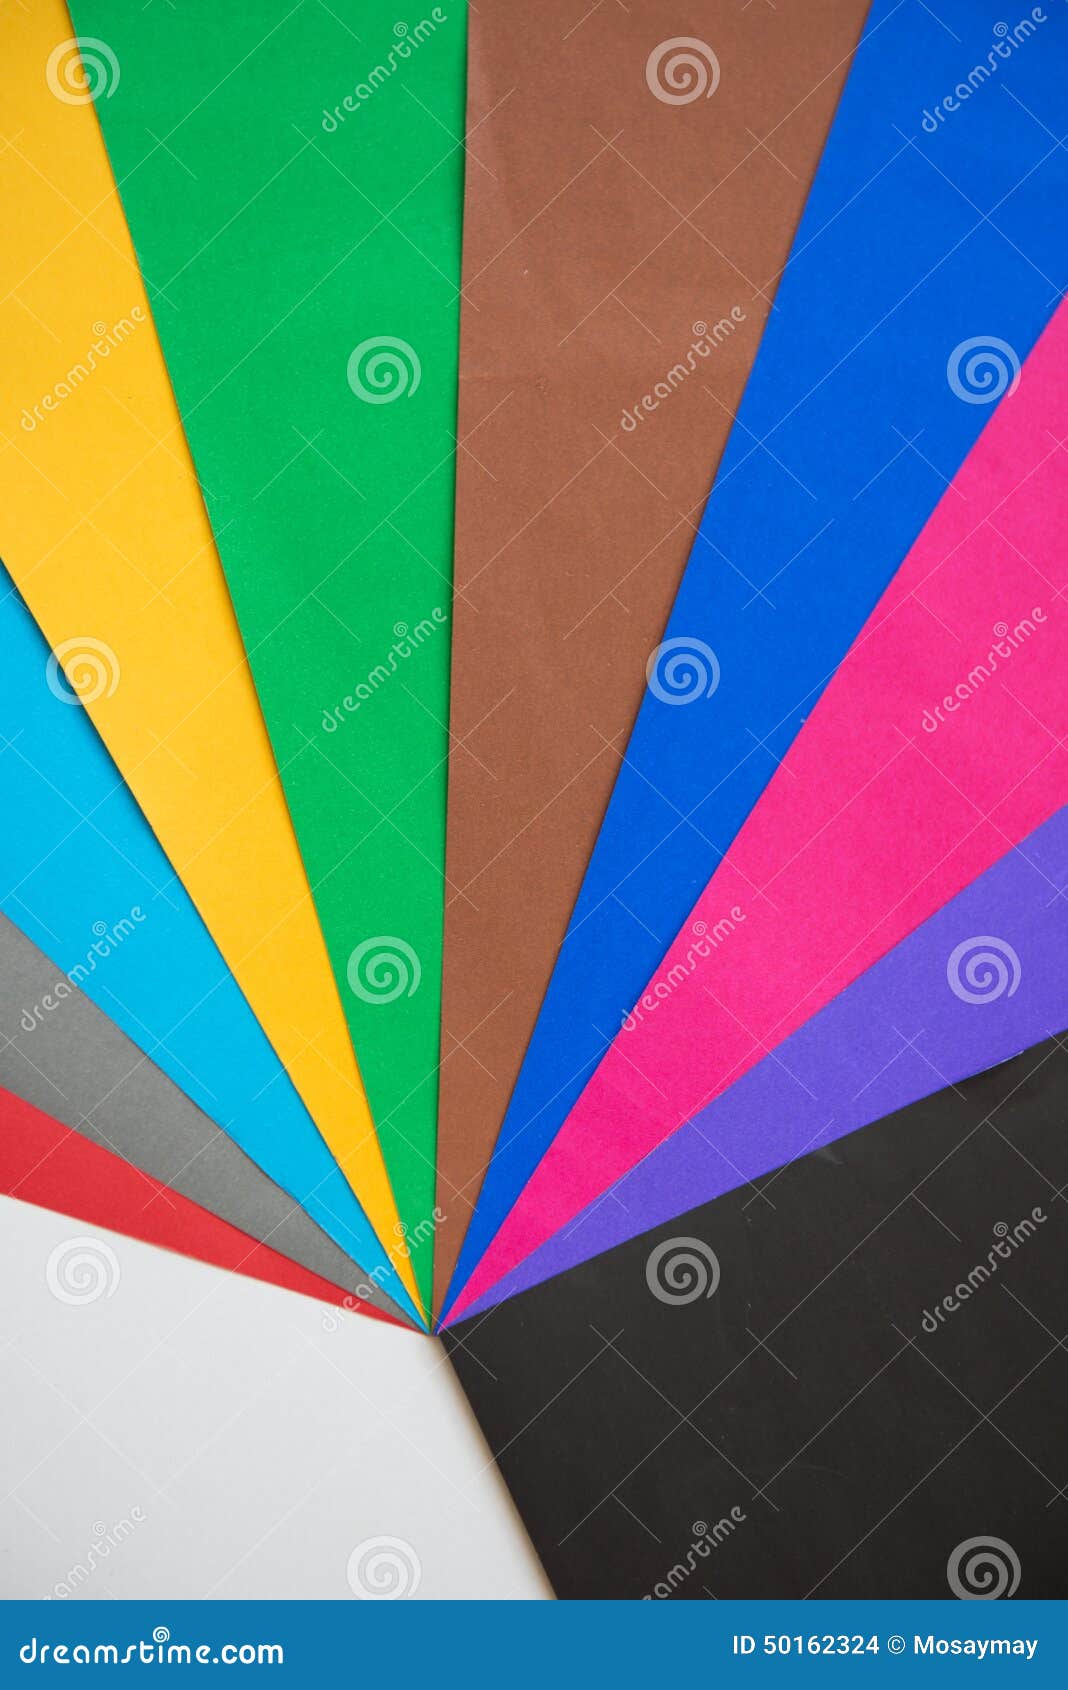 Lot of Color Paper for Crafts Idea Stock Photo - Image of material